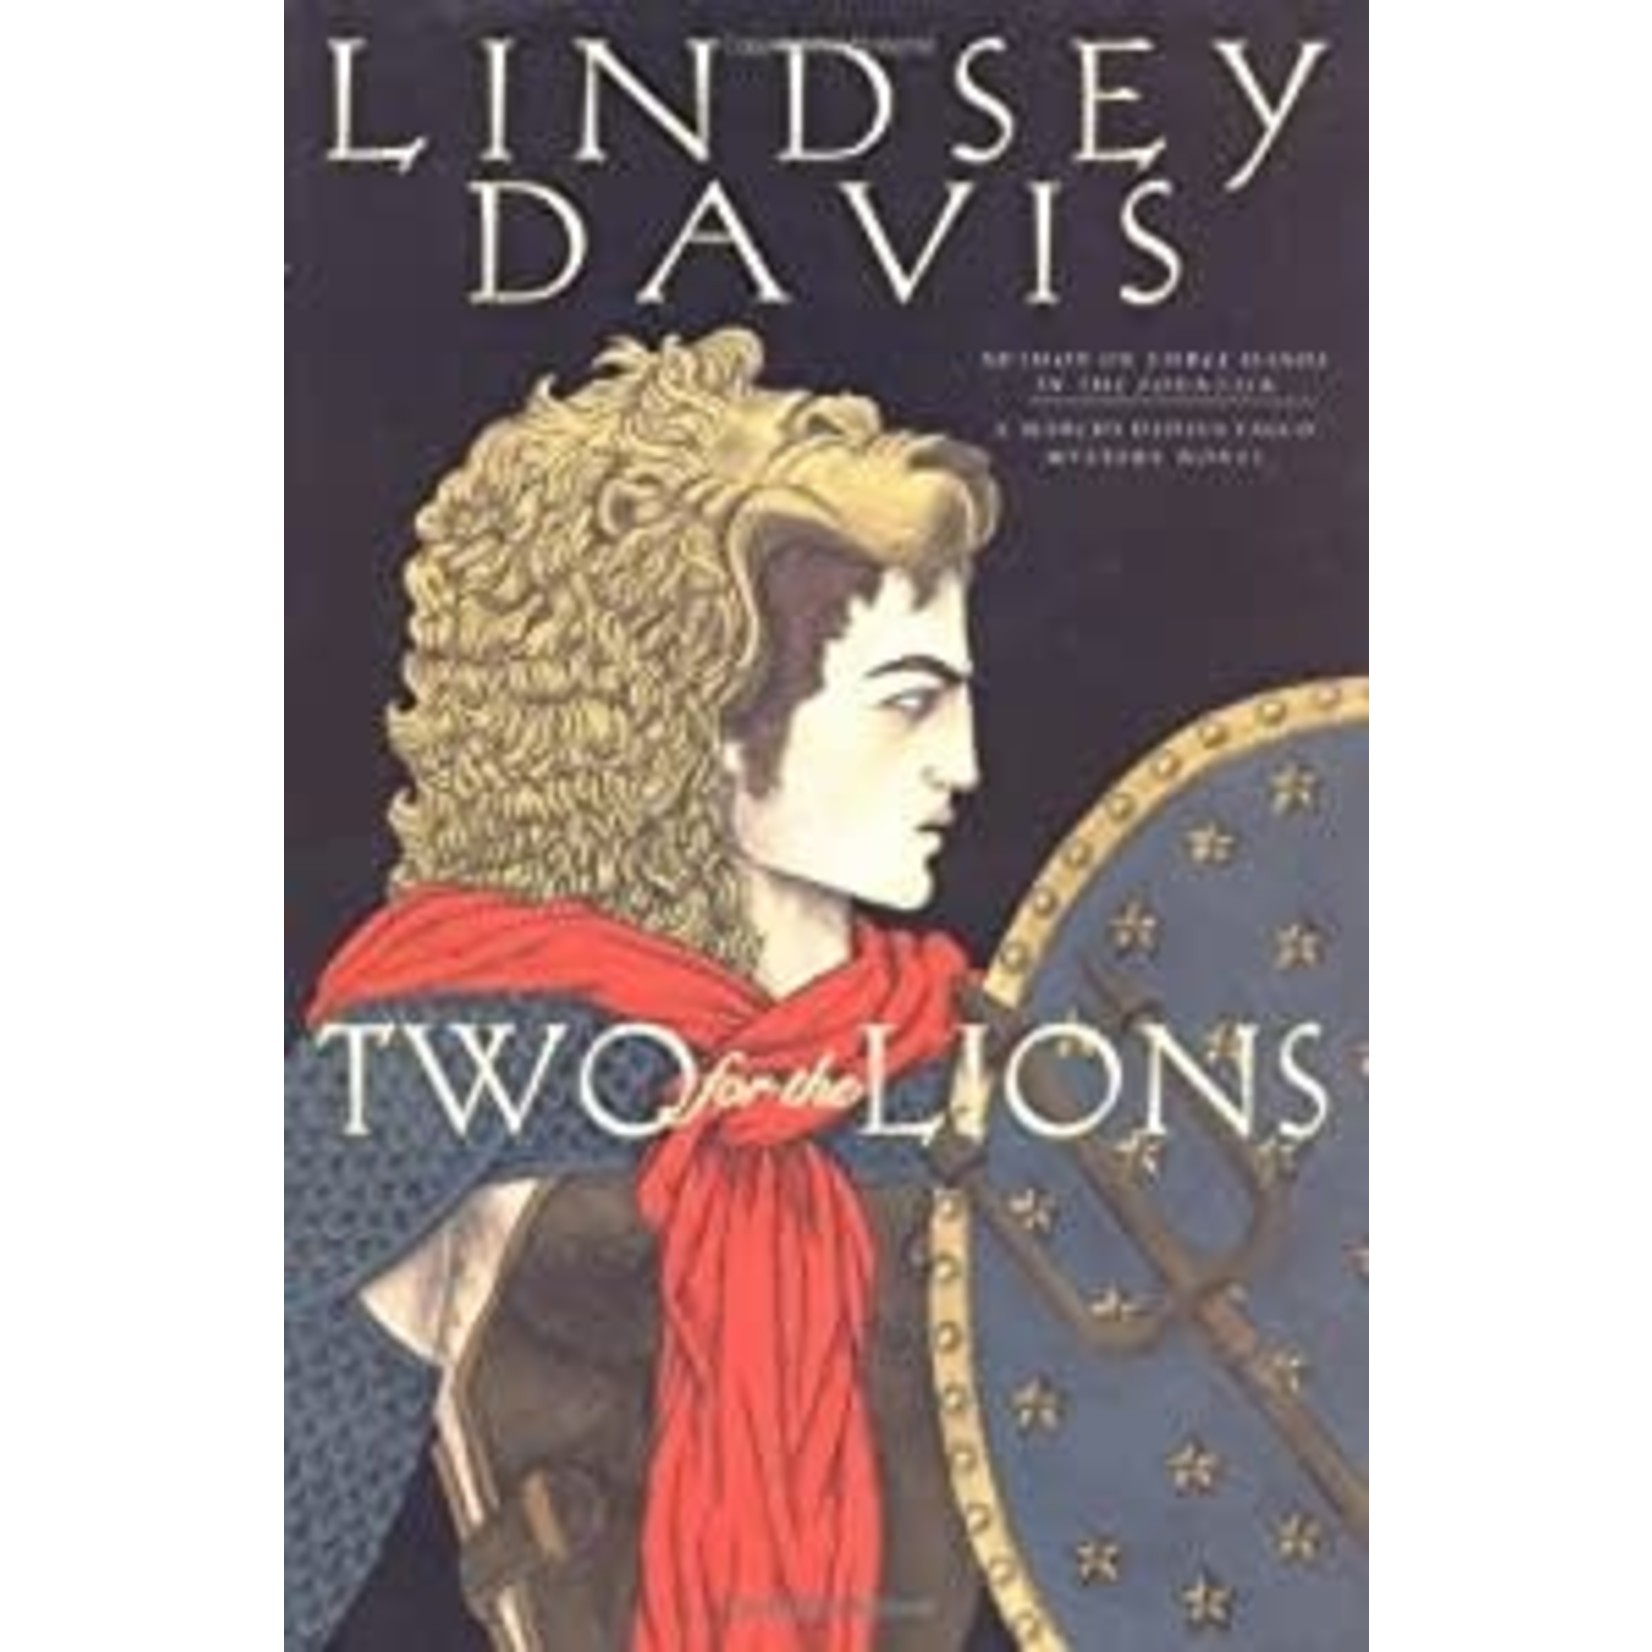 Davis, Lindsey Davis, Lindsey - Two for the Lions (HC, 1st US Edition))